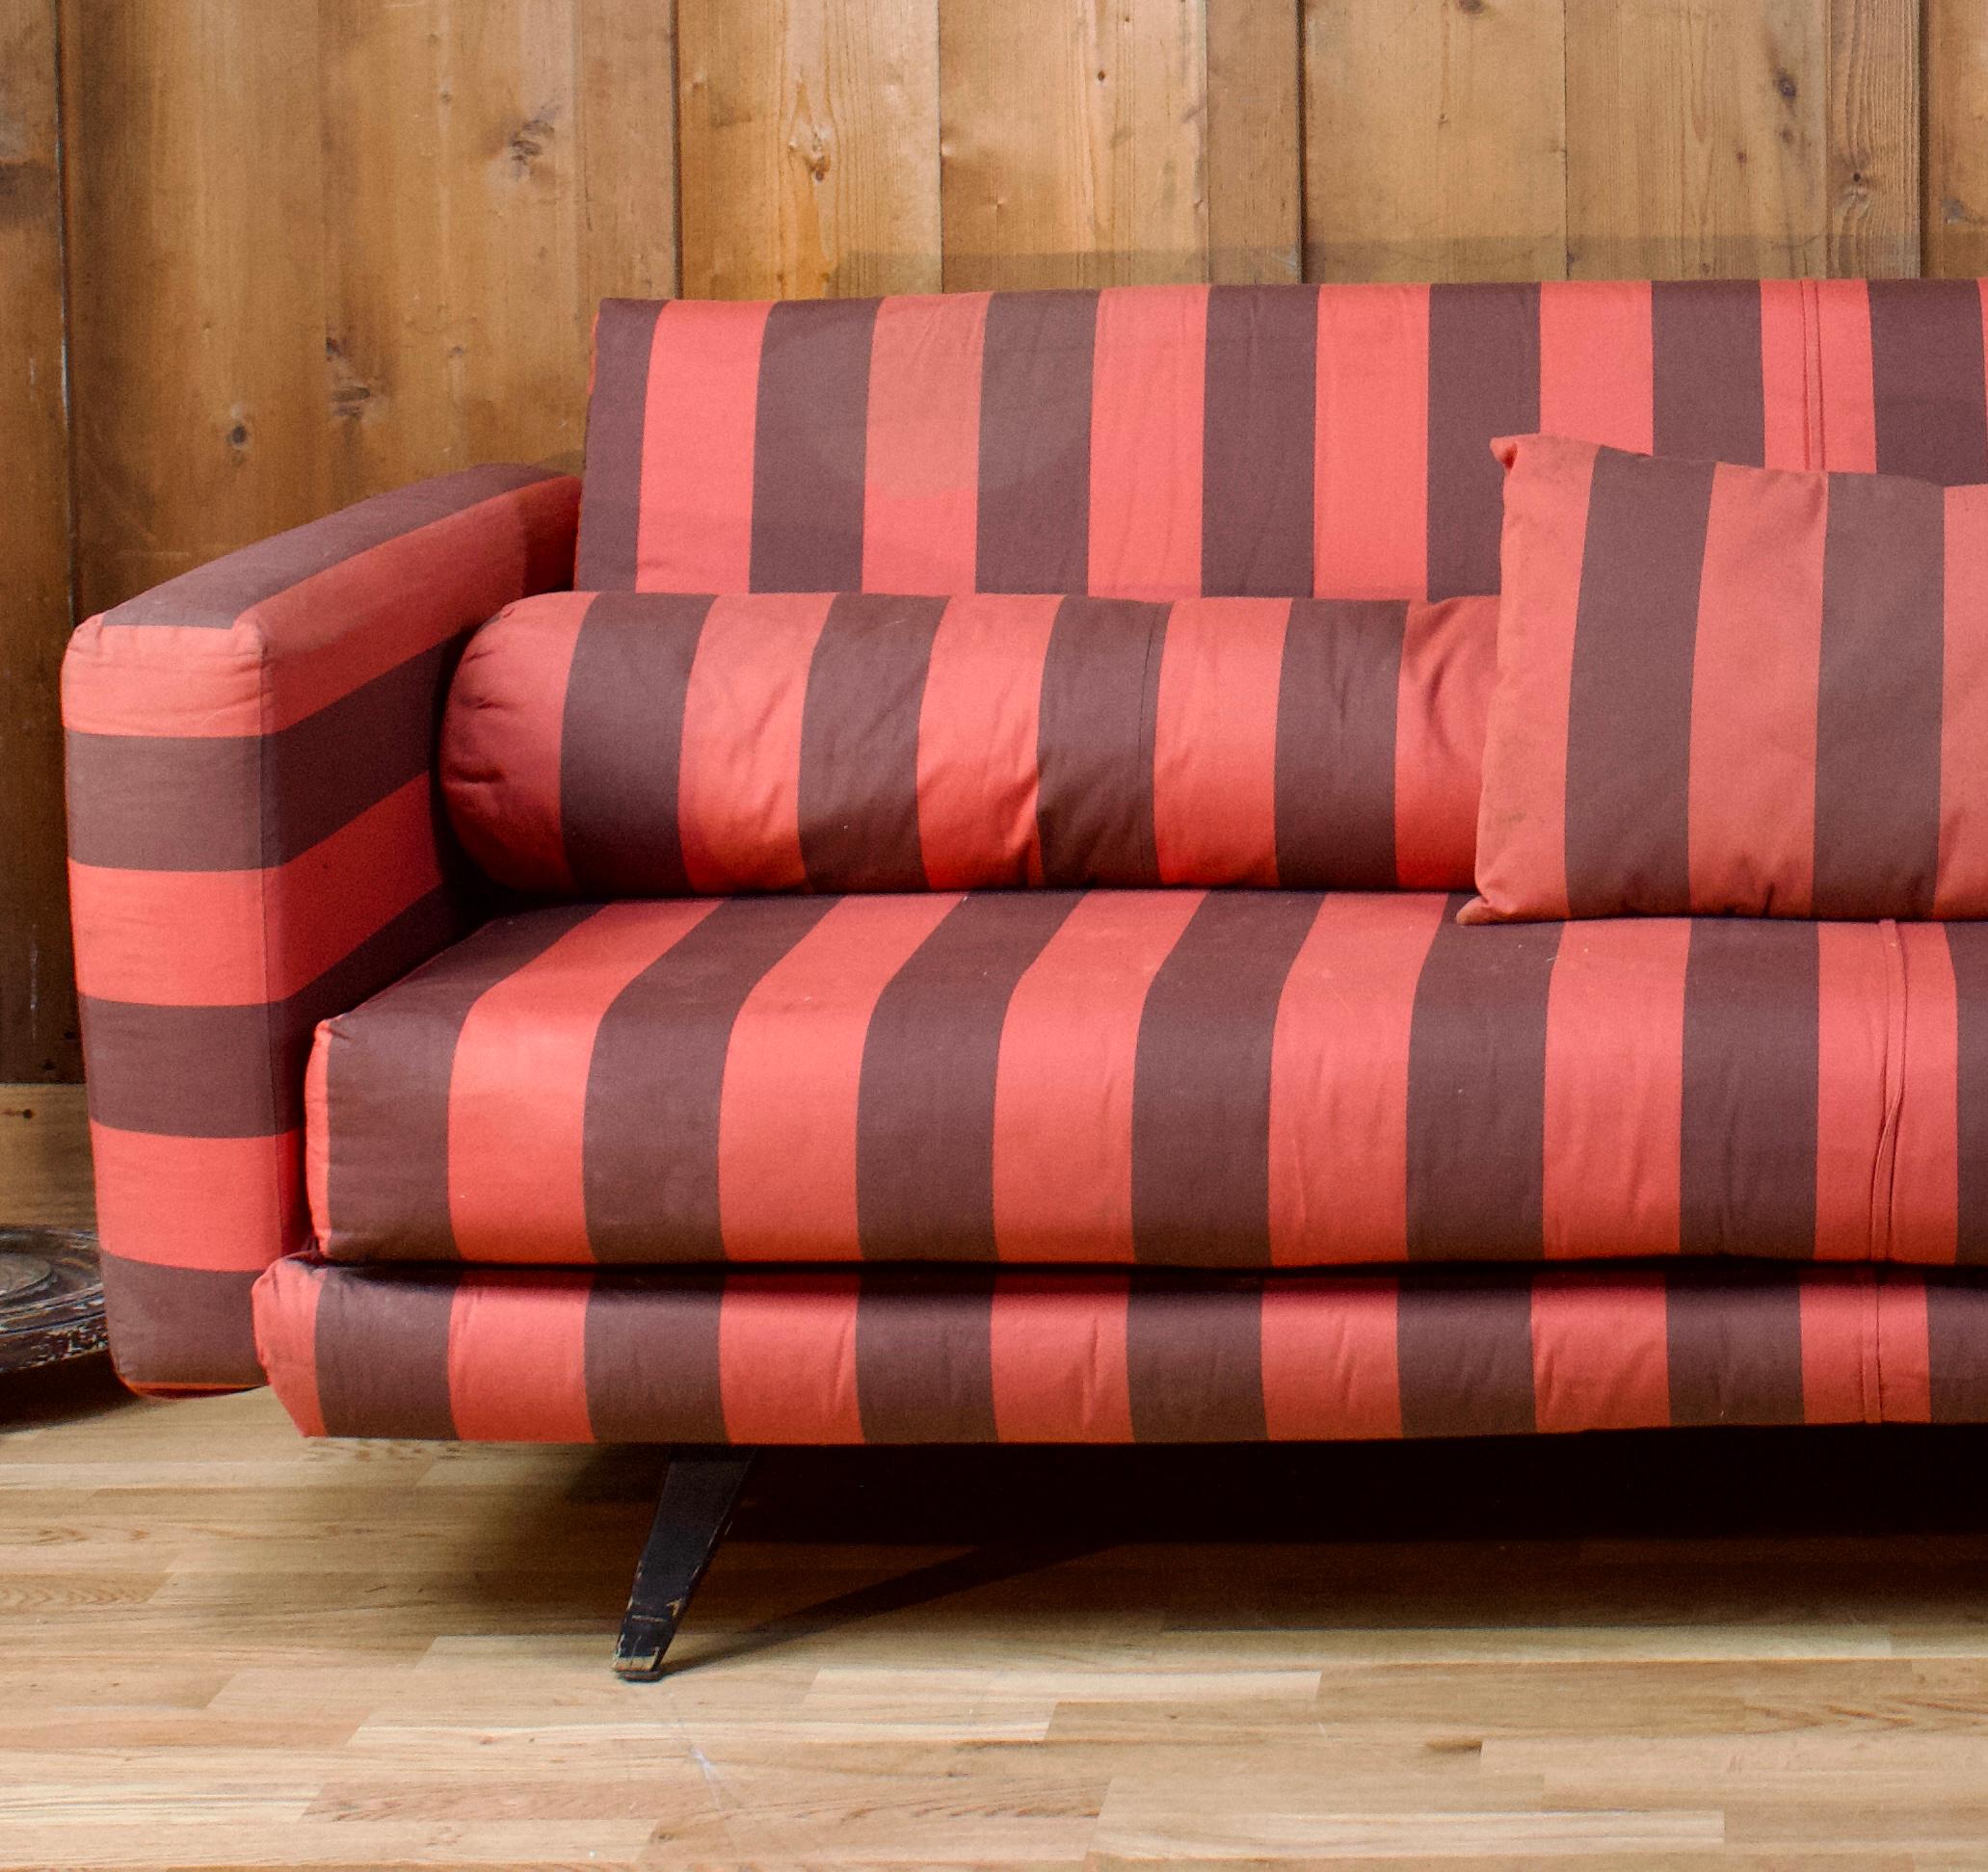 Nice vintage sofa in red and brown striped fabric from the 70s. This sofa has a vintage look and a design with clean lines allowing it to fit into a modern but also classic interior. The upholstery in very good condition in red and pale purple, was